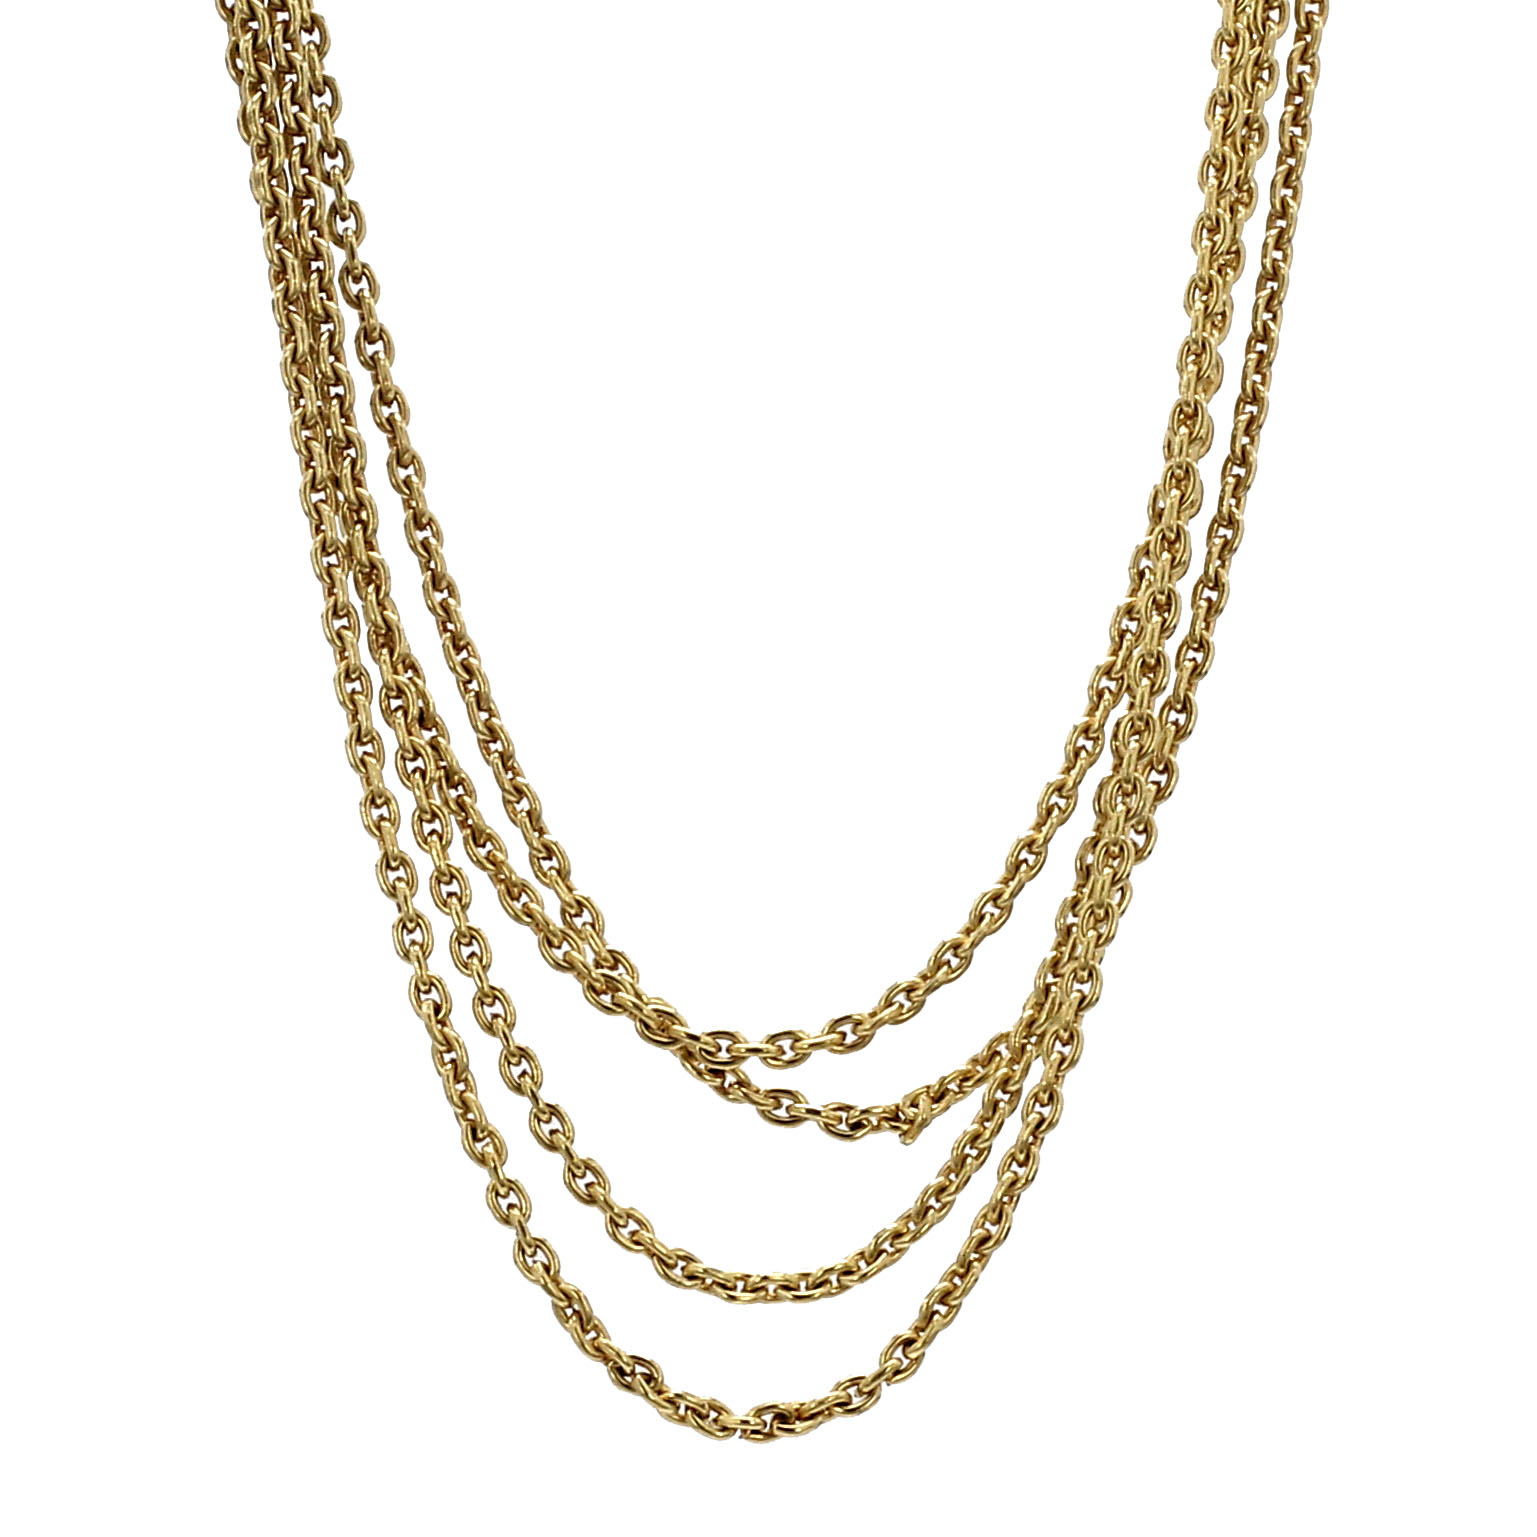 Bailey’s Estate 4 Strand Rolo Chain Necklace in 14k Yellow Gold ...